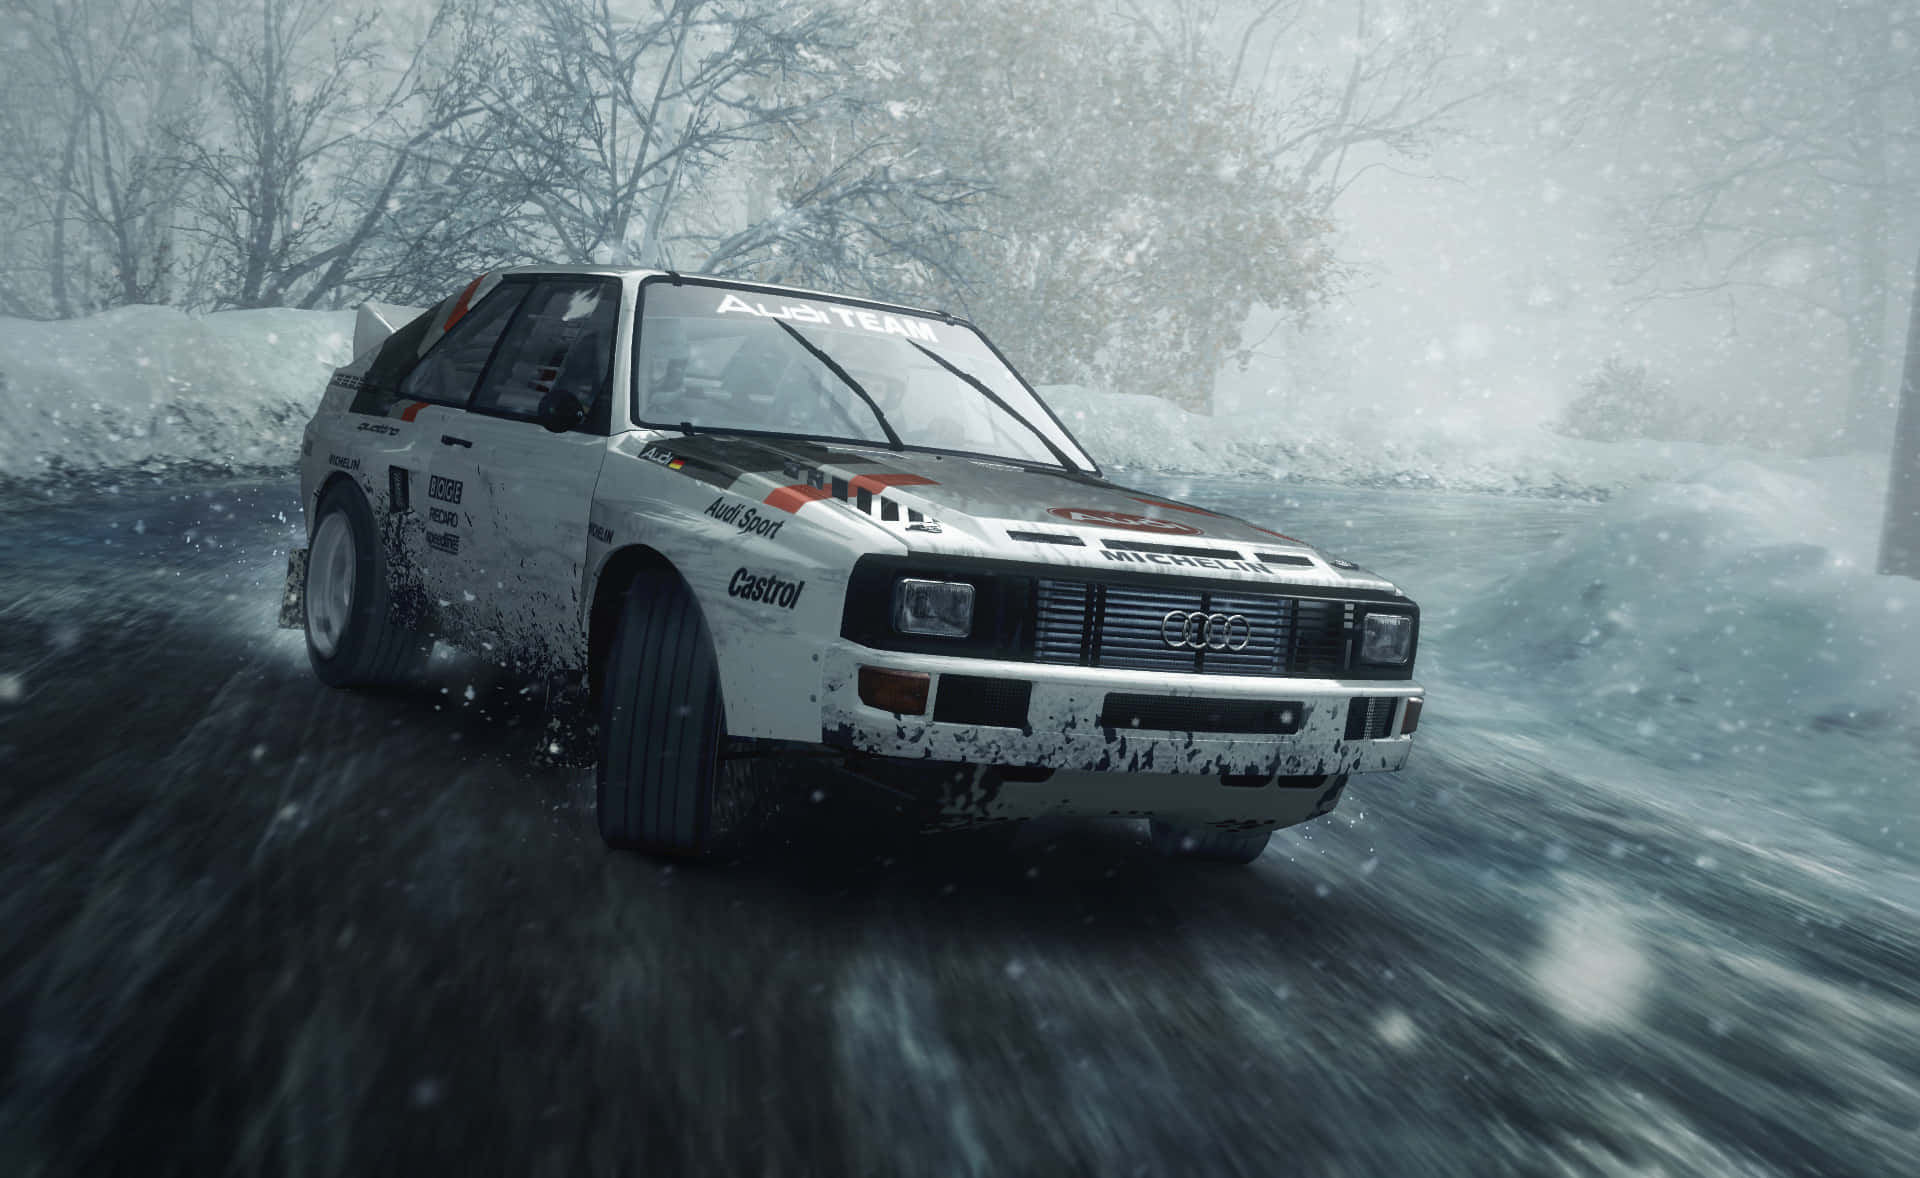 Dirt Rally Game Car On Snowy Winter Road Wallpaper